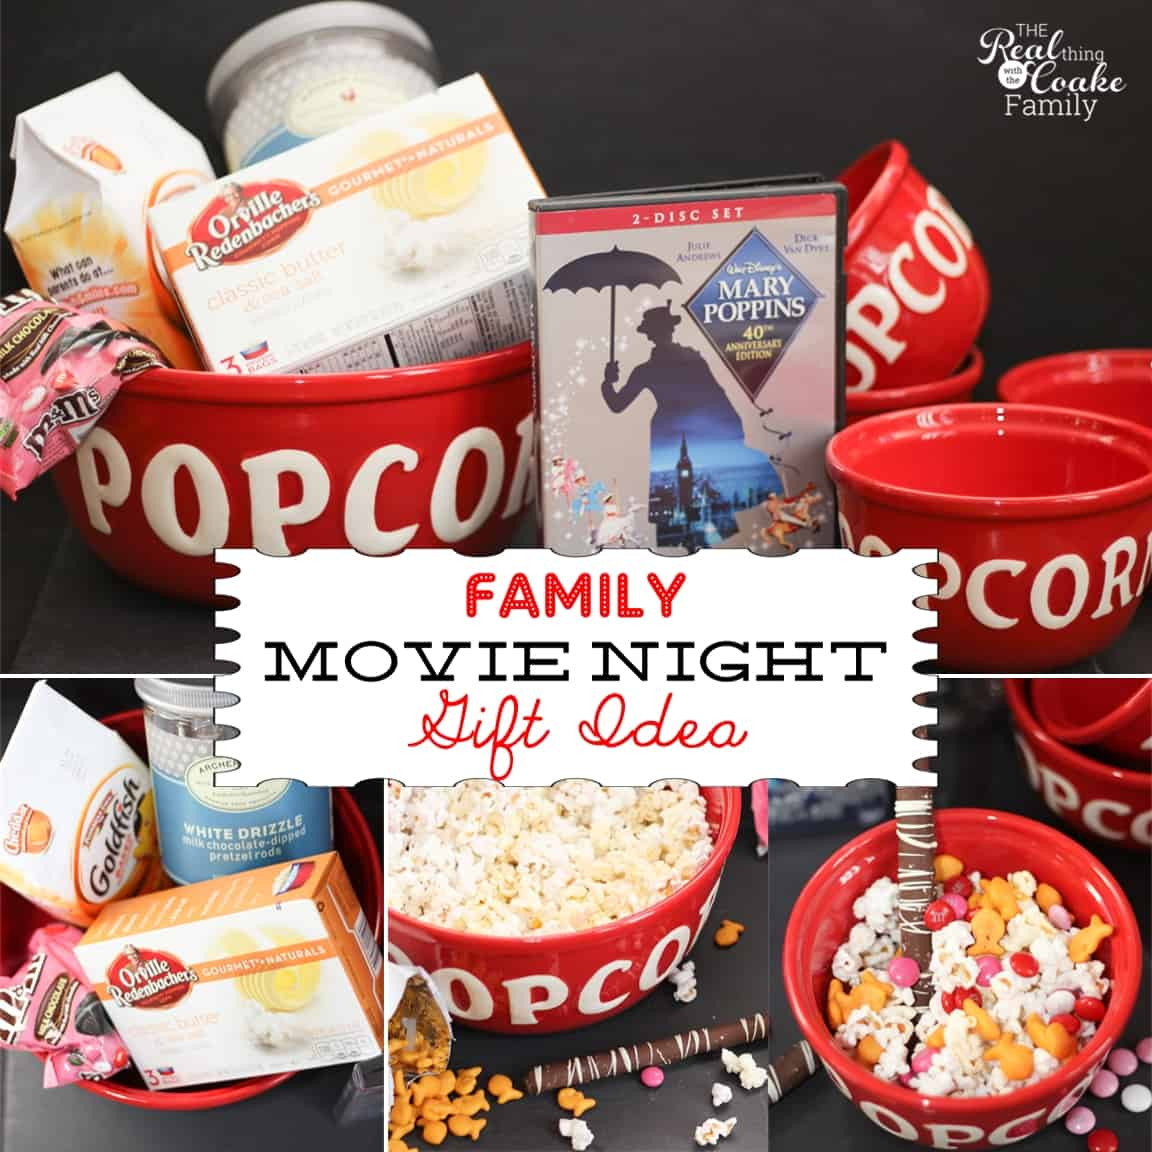 Holiday Gift Ideas Family
 Family Gift Ideas Movie Night in a box or basket